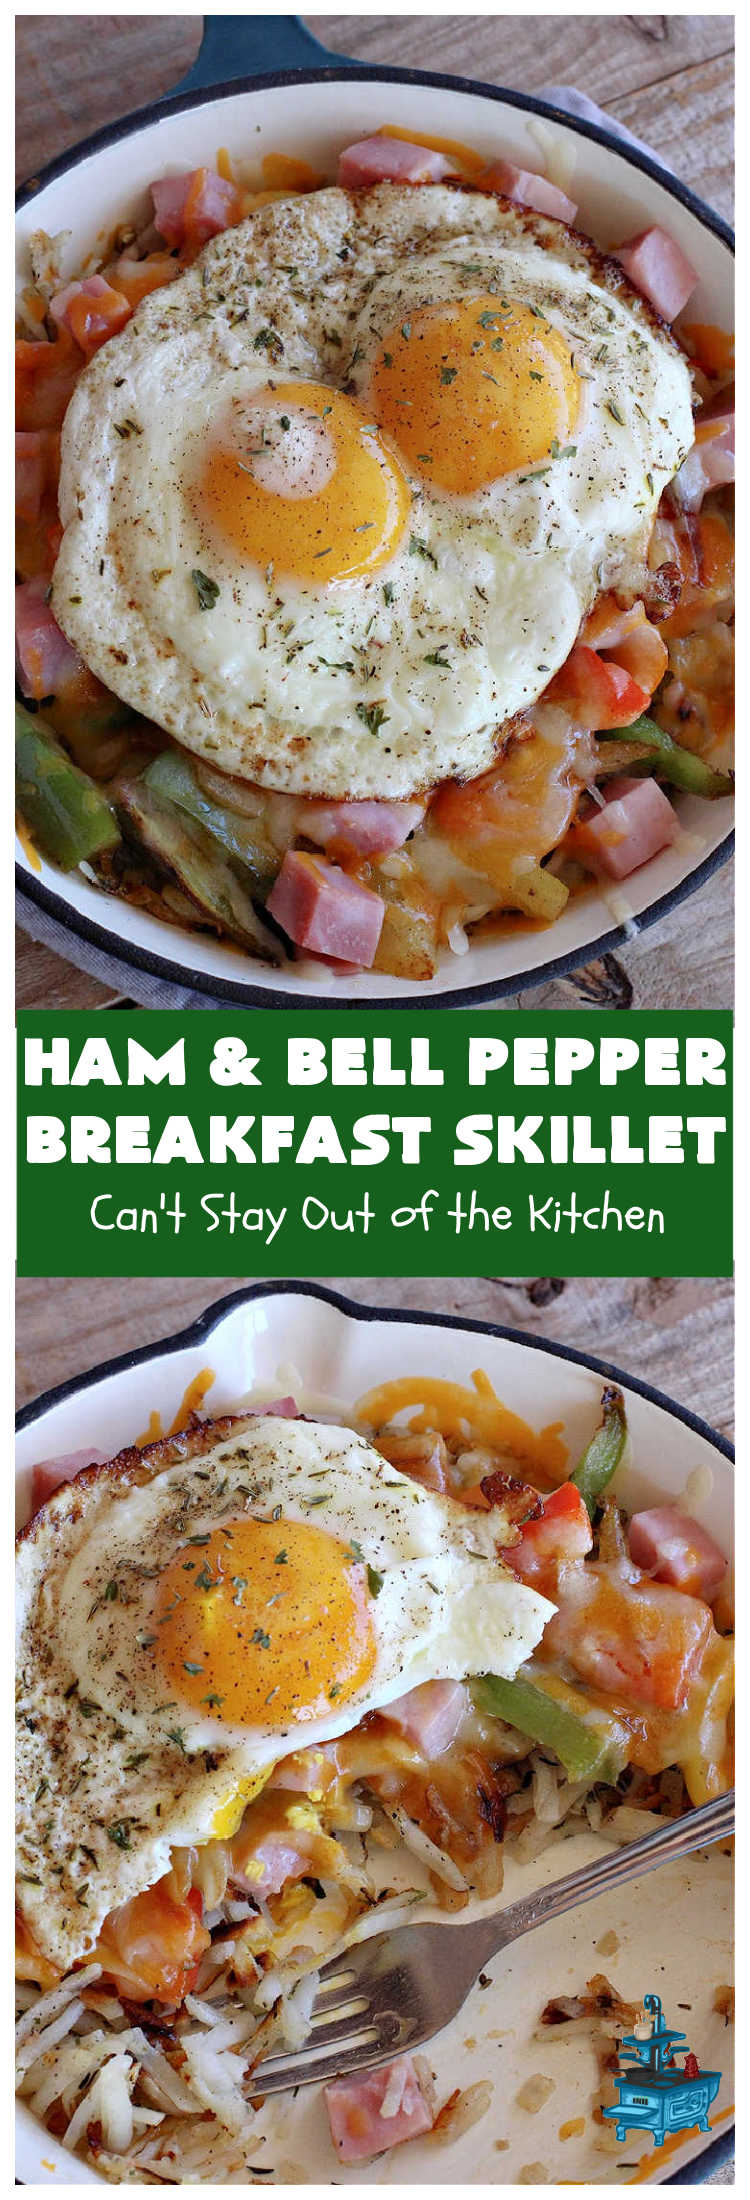 Ham and Bell Pepper Breakfast Skillet | Can't Stay Out of the Kitchen | this hearty & delicious #BreakfastSkillet includes #ham & four kinds of #BellPeppers along with #HashBrowns, #eggs & both #MontereyJack & #CheddarCheese. It makes a totally satisfying & filling weekend or company #breakfast. #holiday #HolidayBreakfast #SkilletBreakfast #HamAndBellPepperBreakfastSkillet #GlutenFree #pork